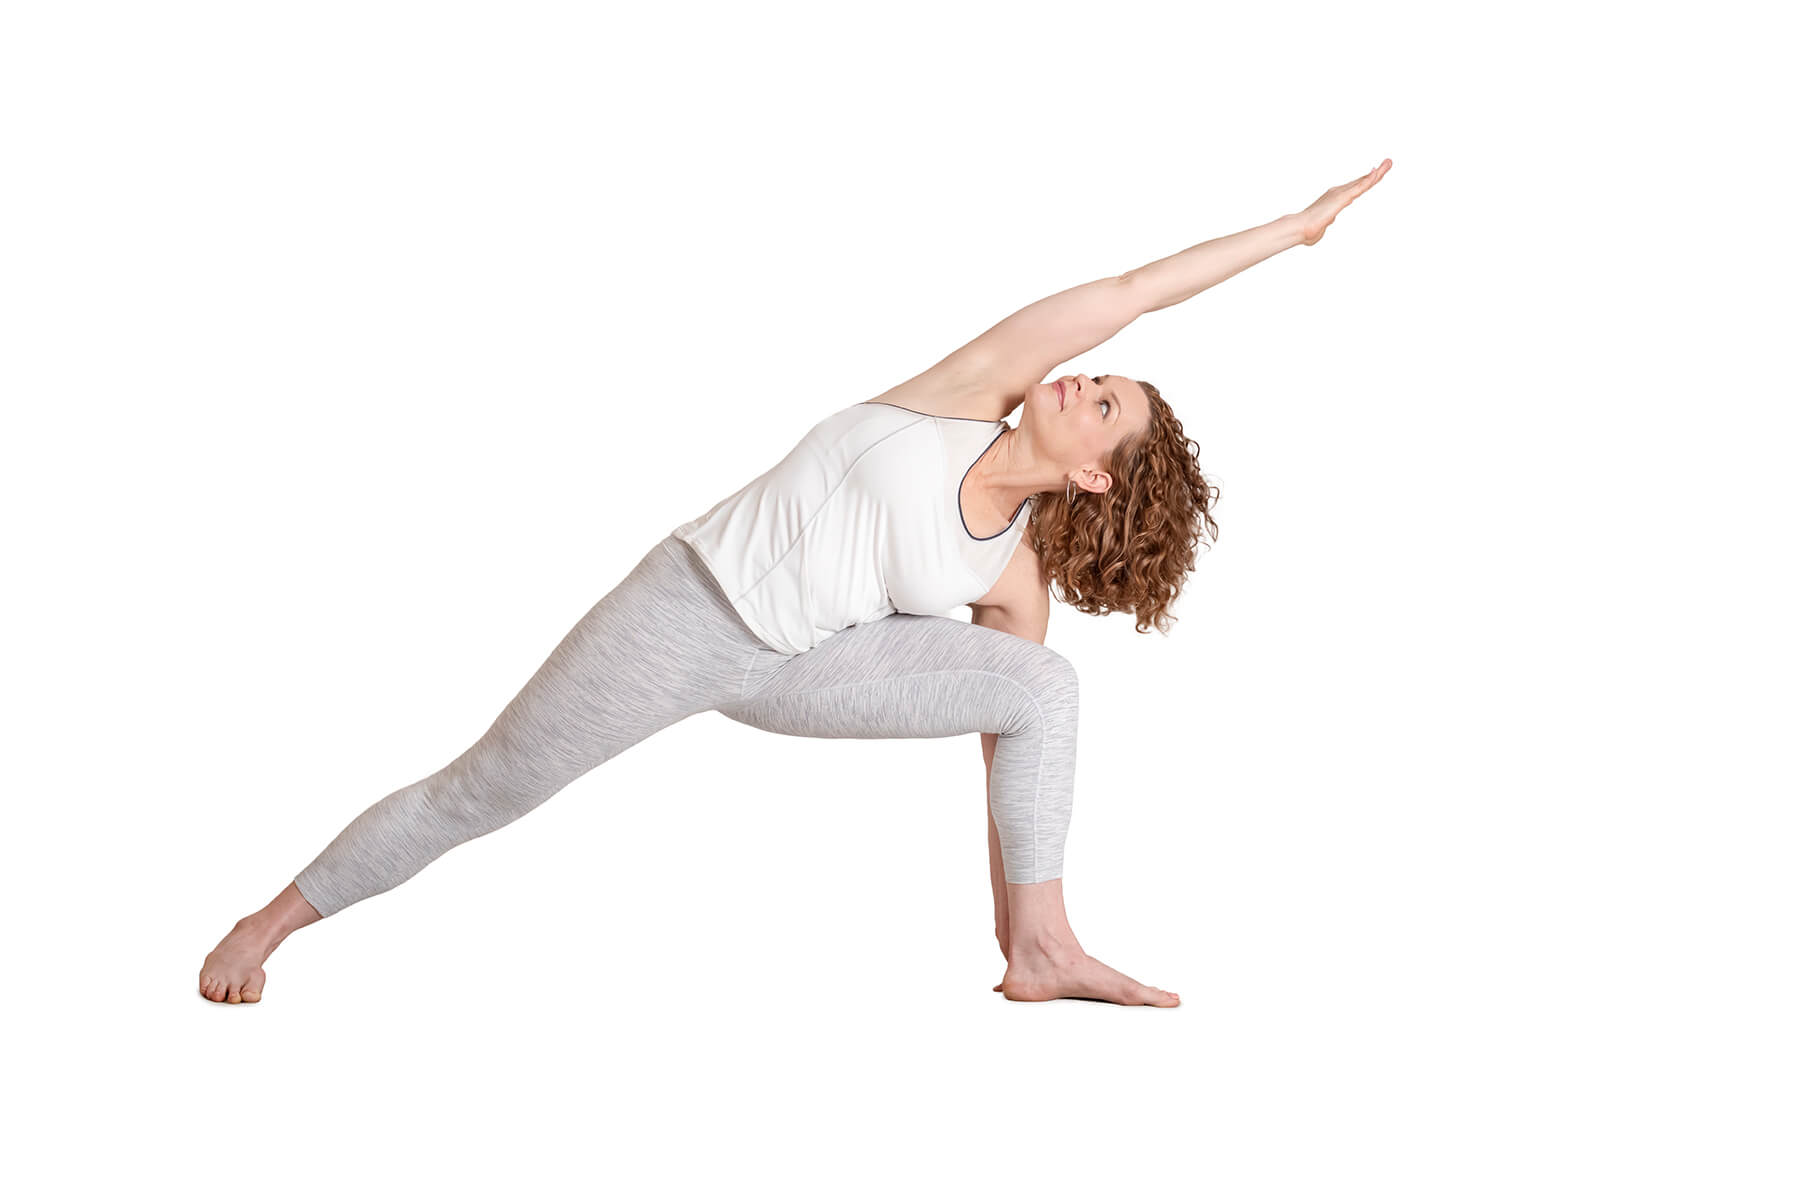 extended side angle pose